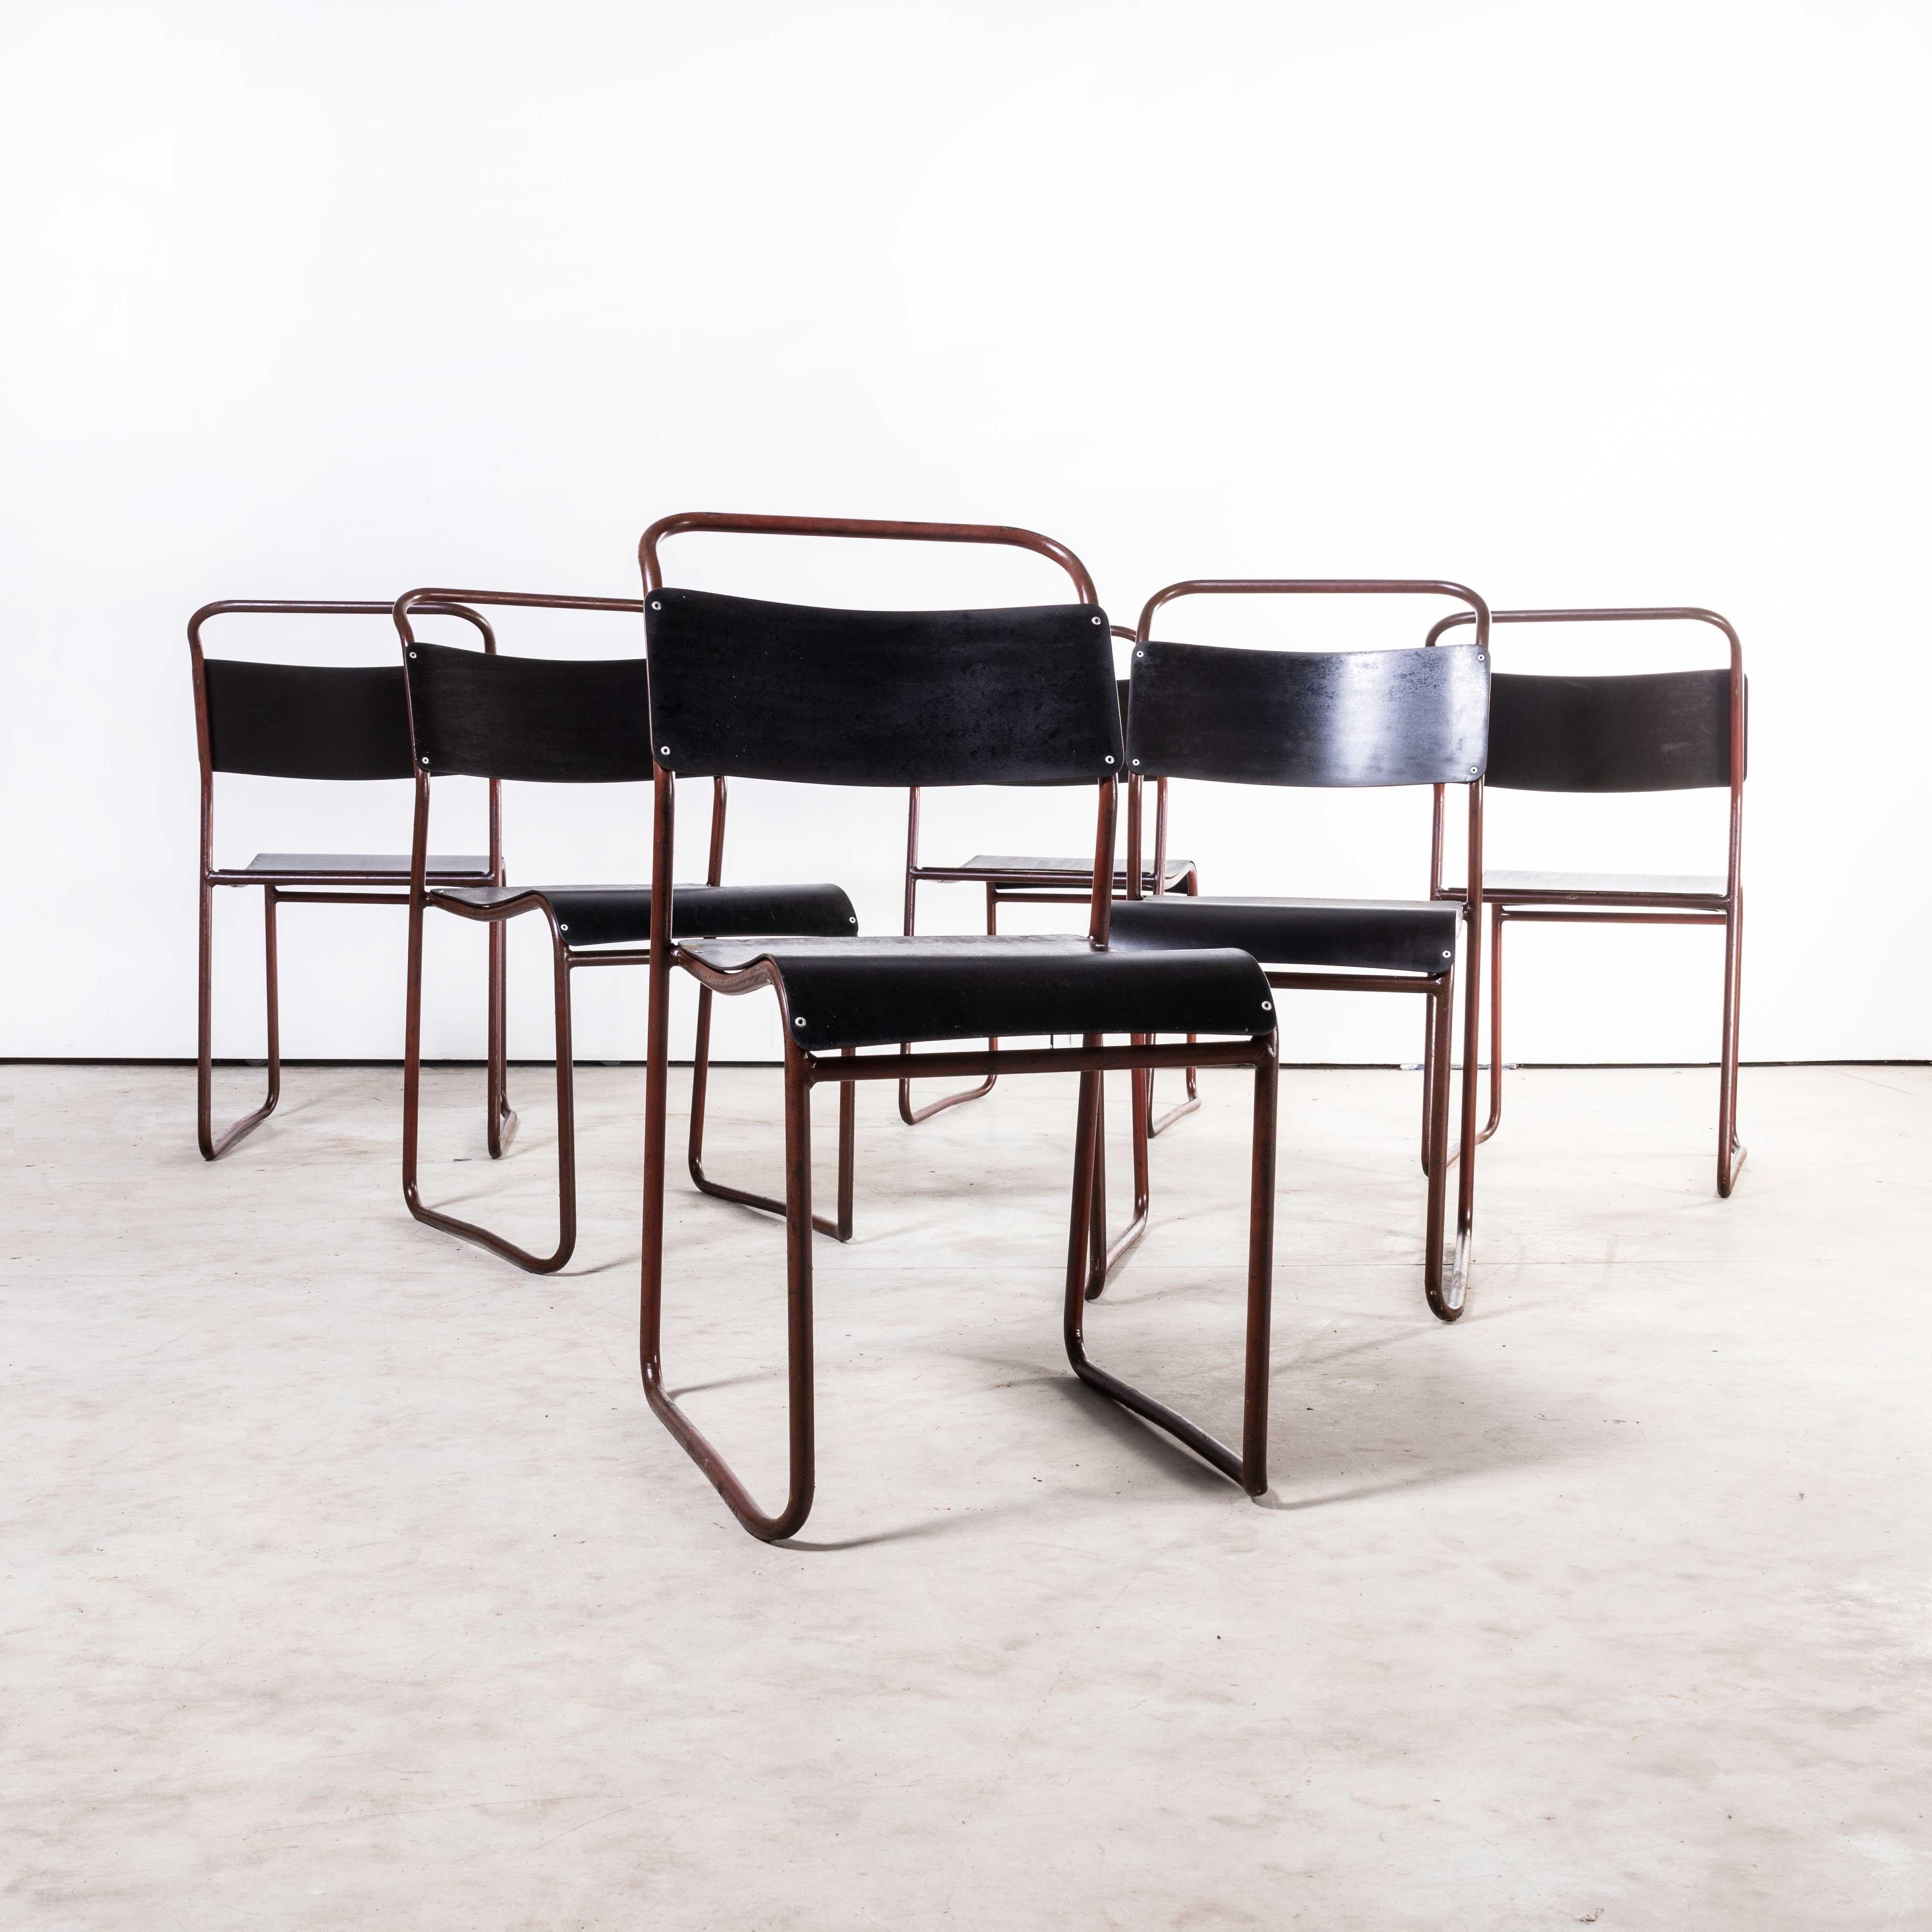 1950’s Cox tubular blood red metal dining chairs – set of six.
1950’s Cox tubular blood red metal dining chairs – set of six. Cox was one of the largest producers of tubular stacking chairs initially developed by the Bauhaus movement. These chairs